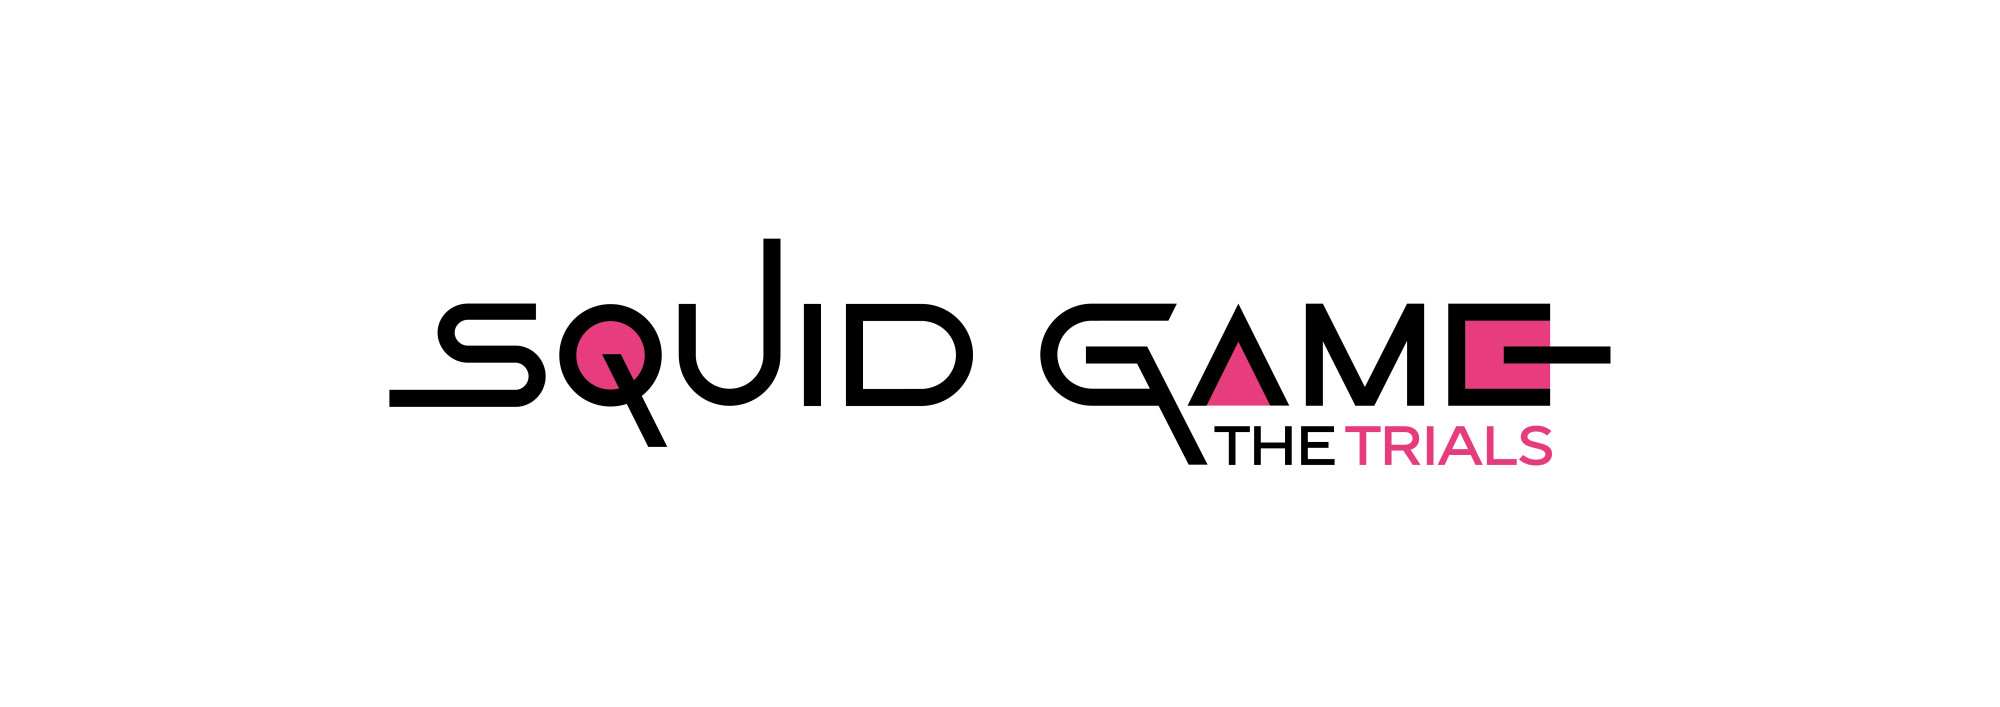 Experience Squid Game: The Trials in Los Angeles This December